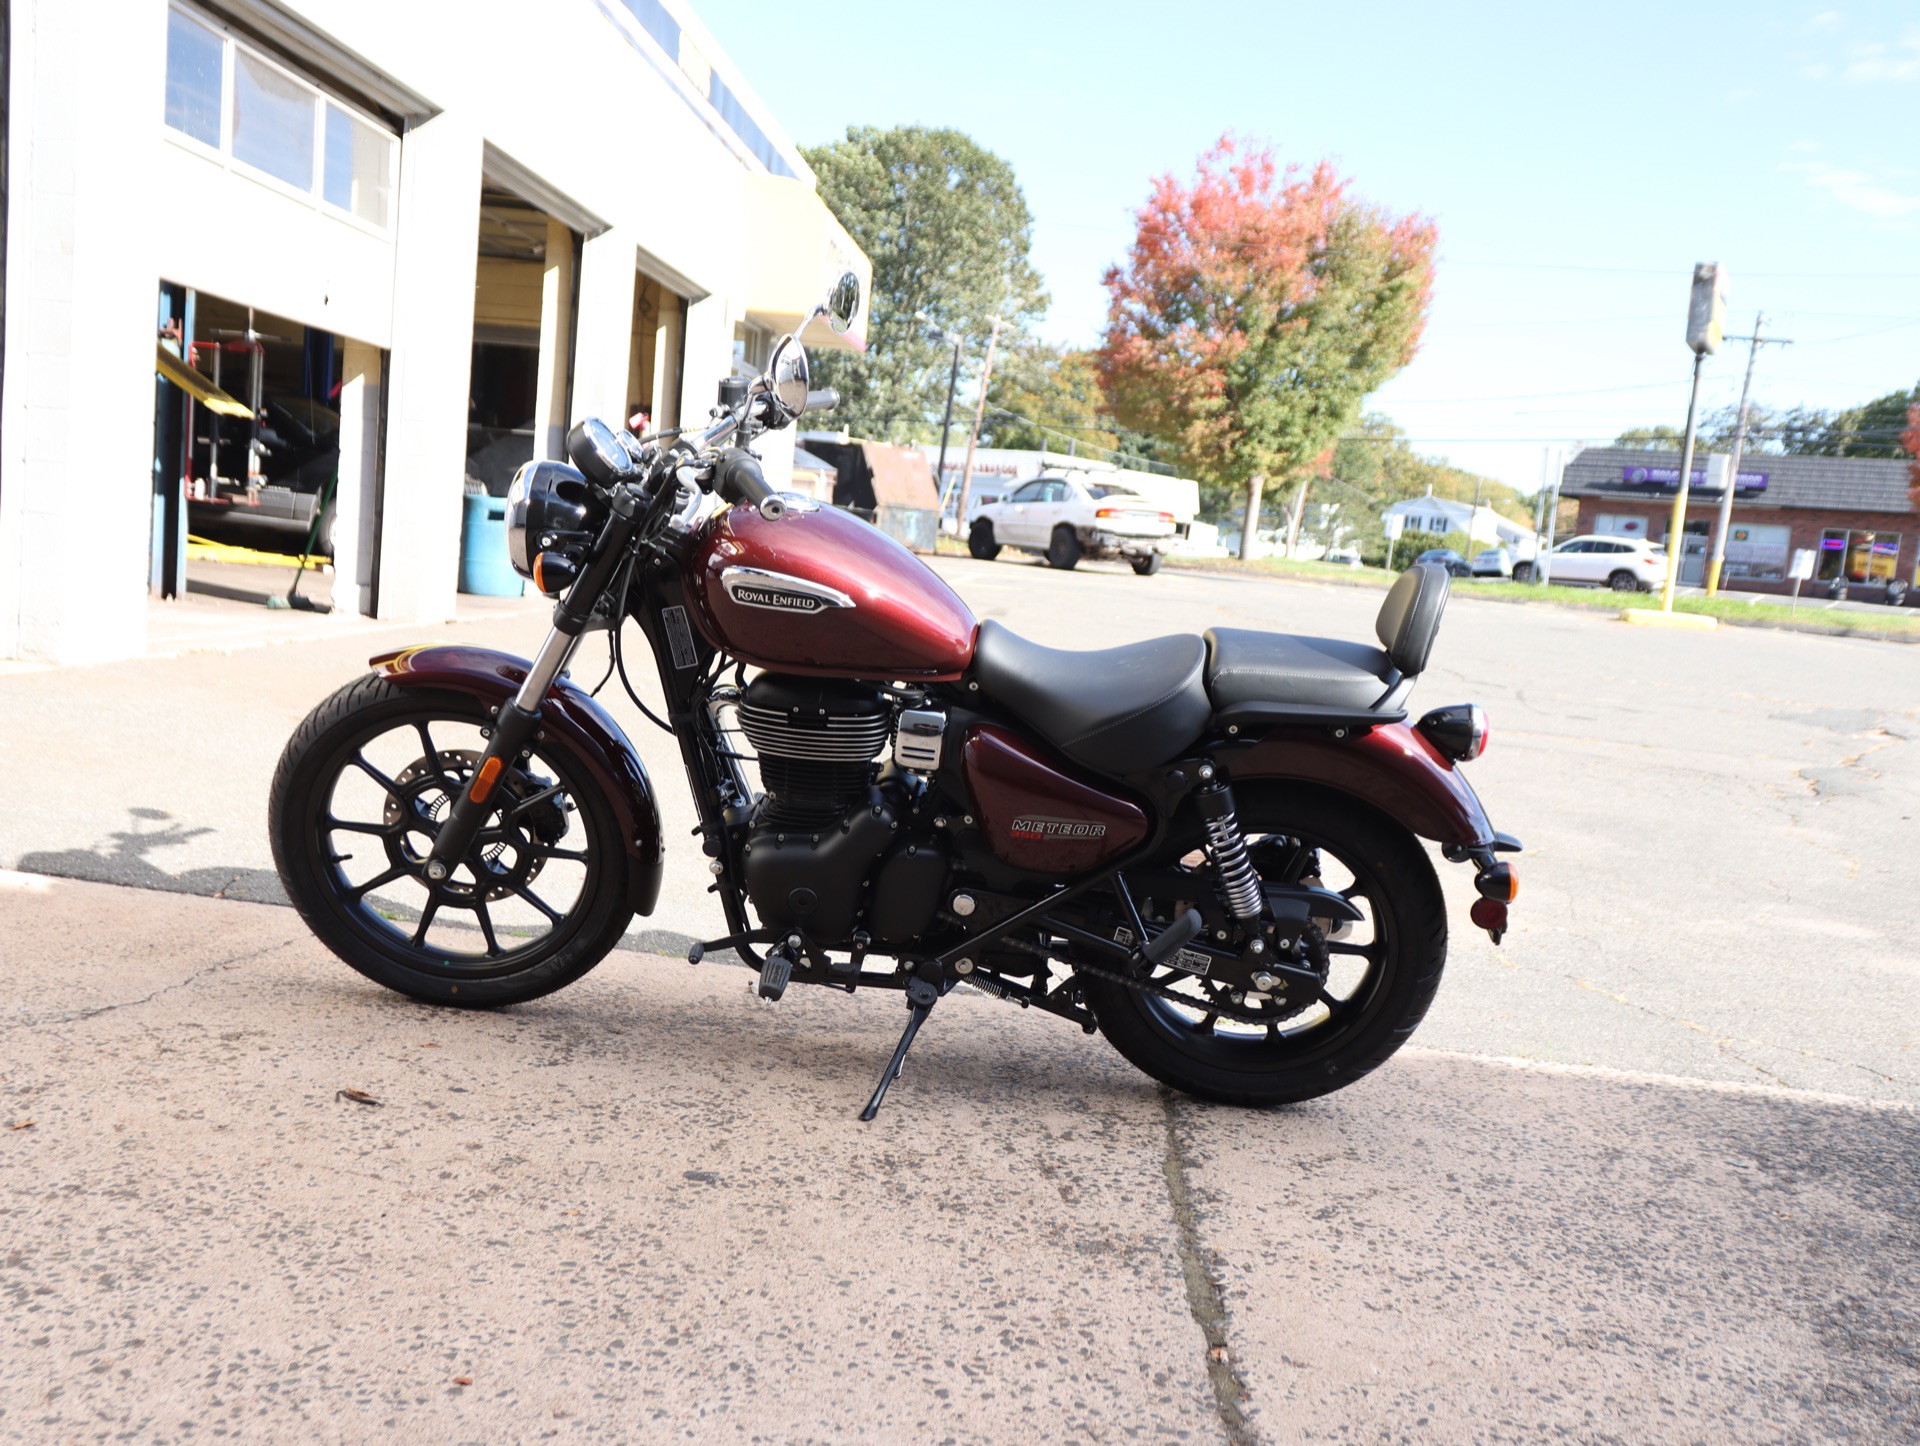 2022 Royal Enfield Meteor 350 in Enfield, Connecticut - Photo 6